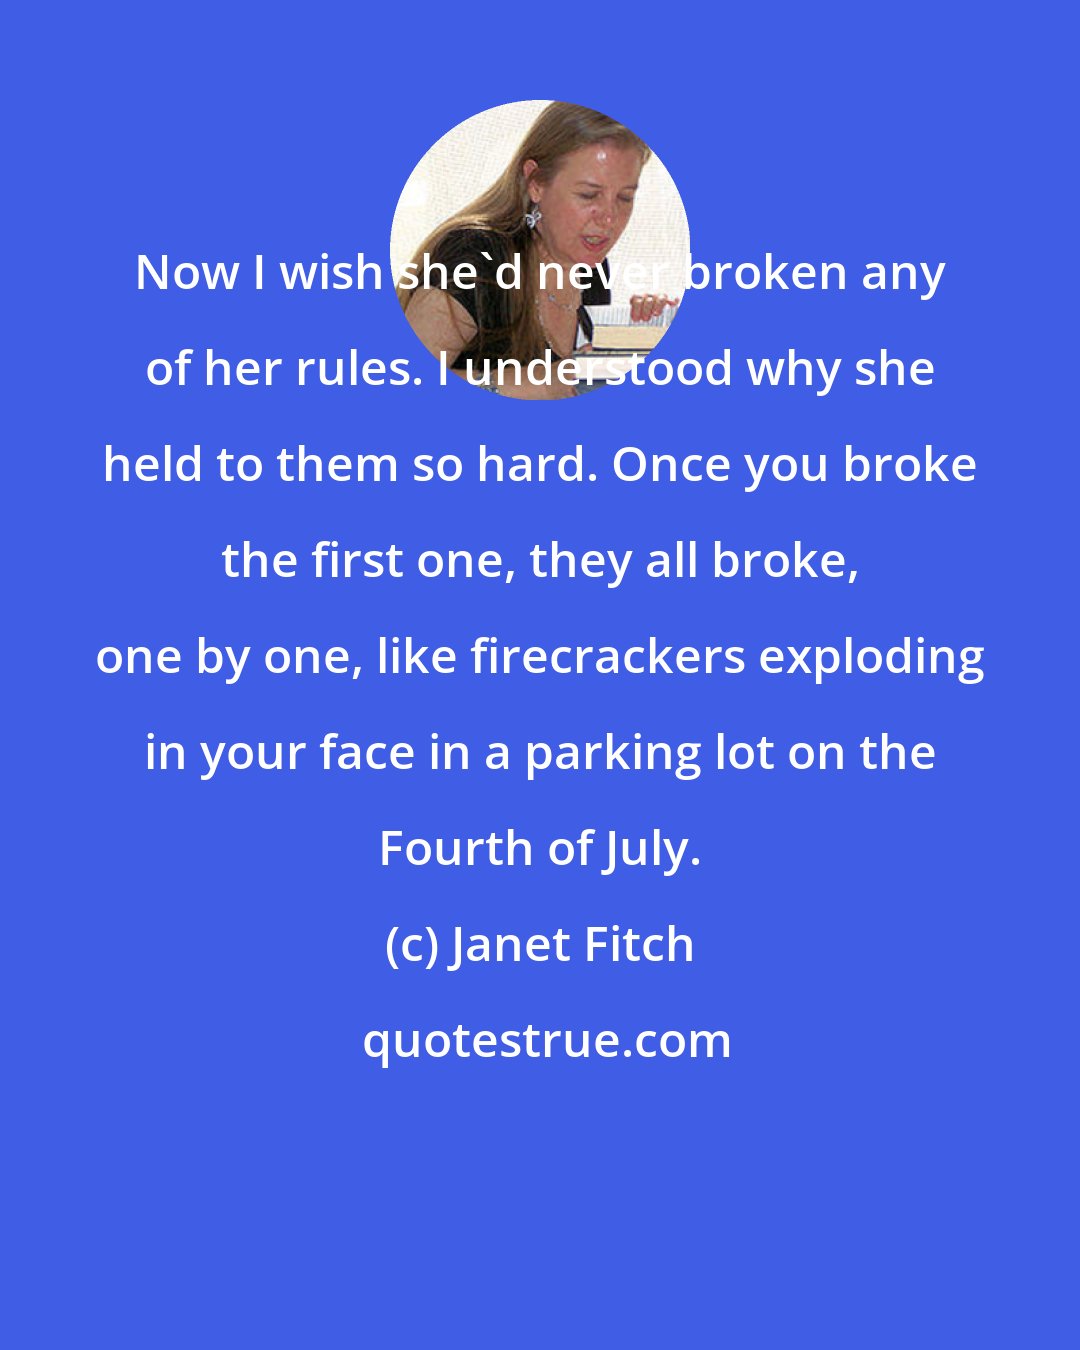 Janet Fitch: Now I wish she'd never broken any of her rules. I understood why she held to them so hard. Once you broke the first one, they all broke, one by one, like firecrackers exploding in your face in a parking lot on the Fourth of July.